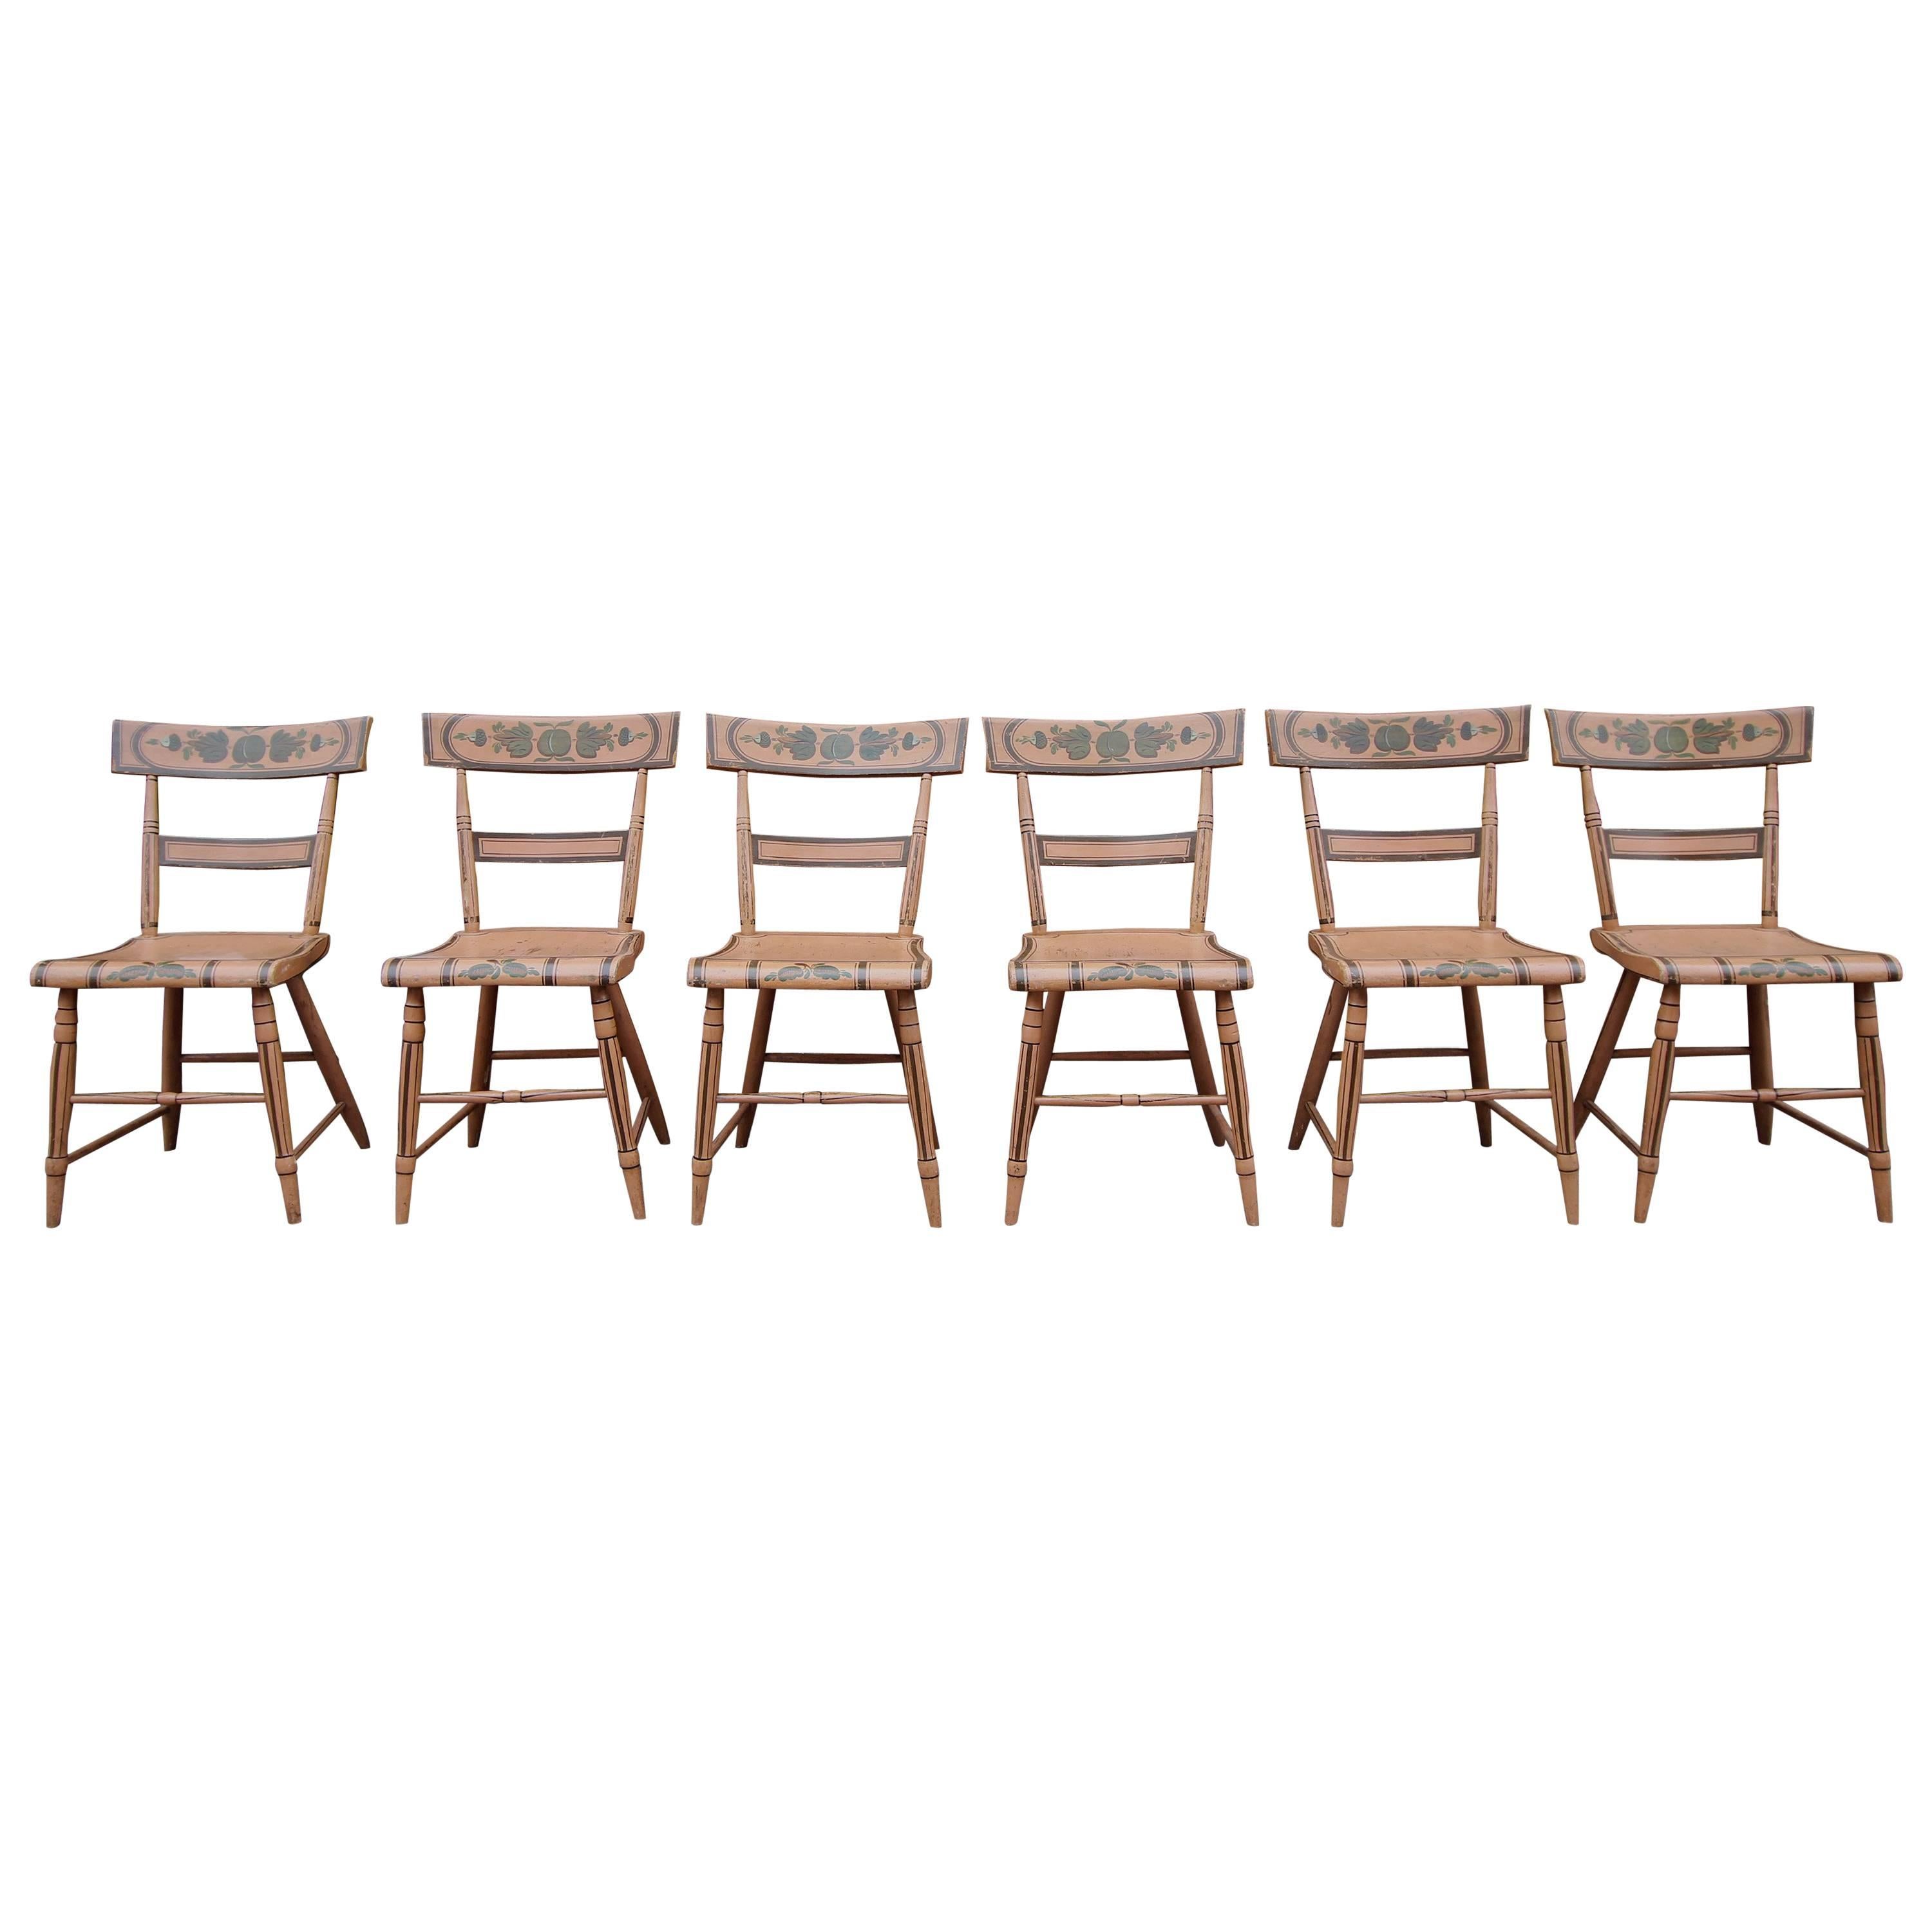 Set of Six Salmon Painted and Decorated Chairs, Pennsylvania, circa 1840 For Sale